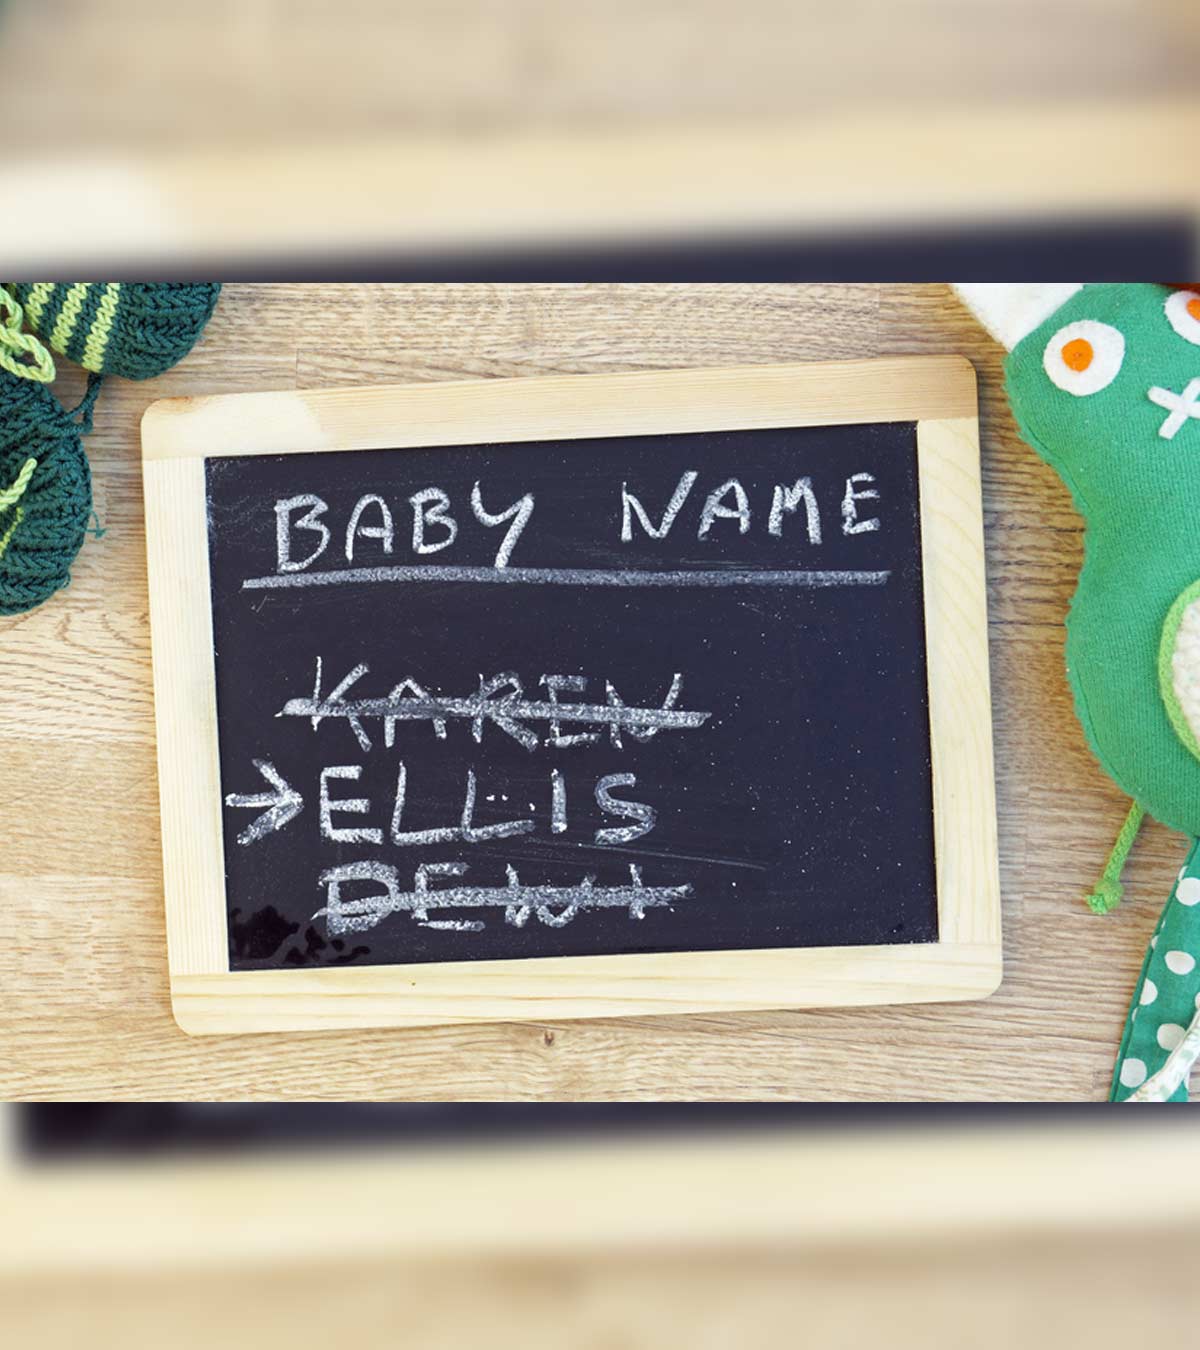 Top 18 Baby Names You’d Definitely Want To Check Out If You Are Due Next Year